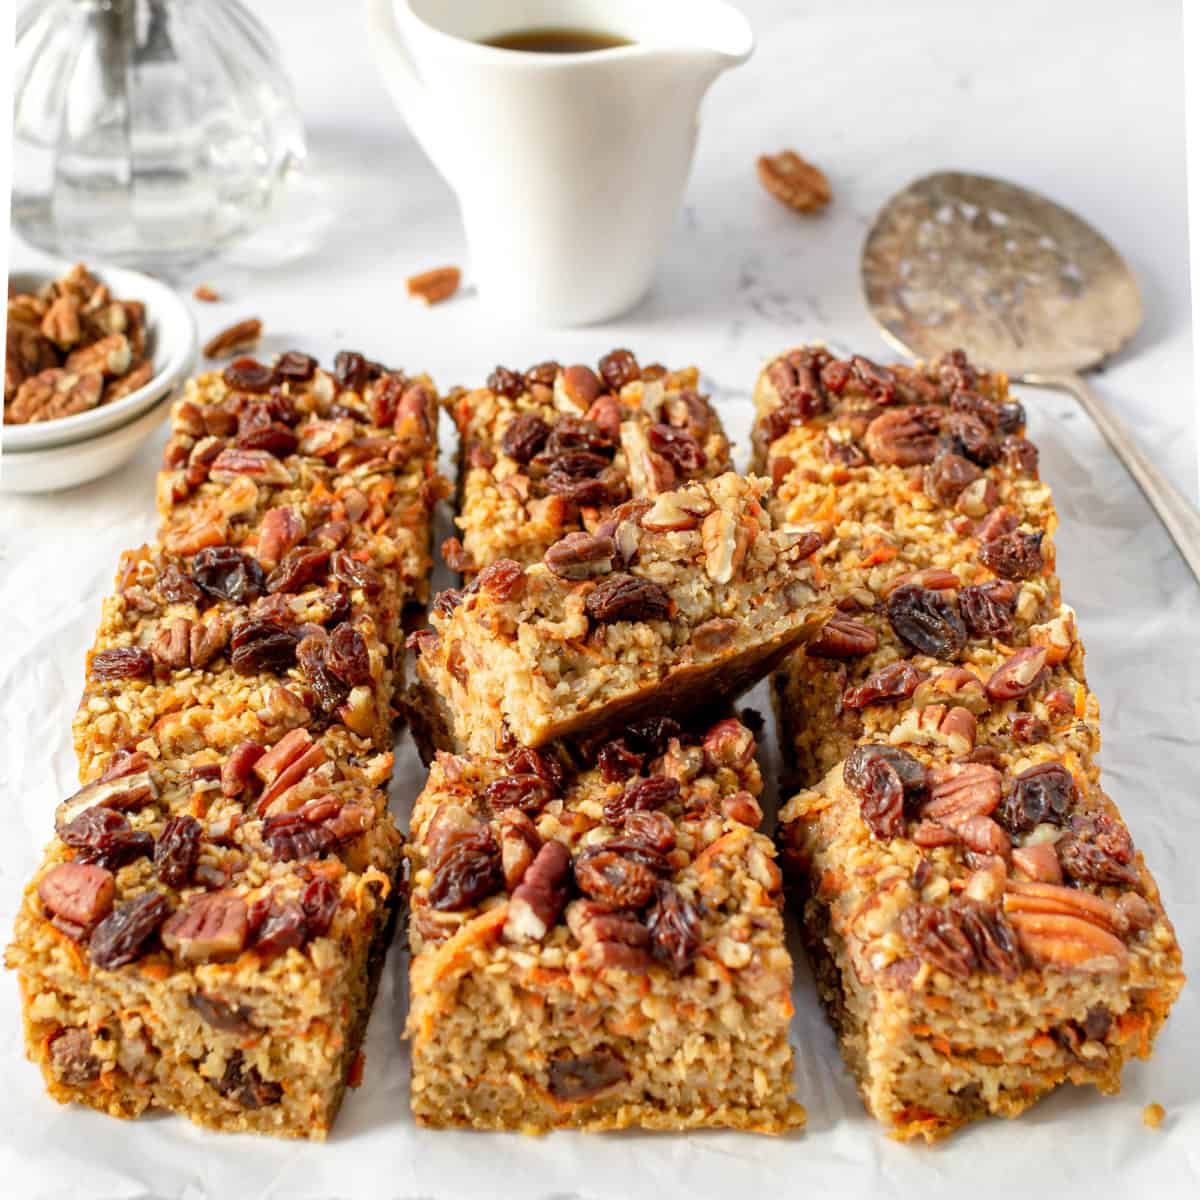 A dish with 9 carrot cake oatmeal bars on it.